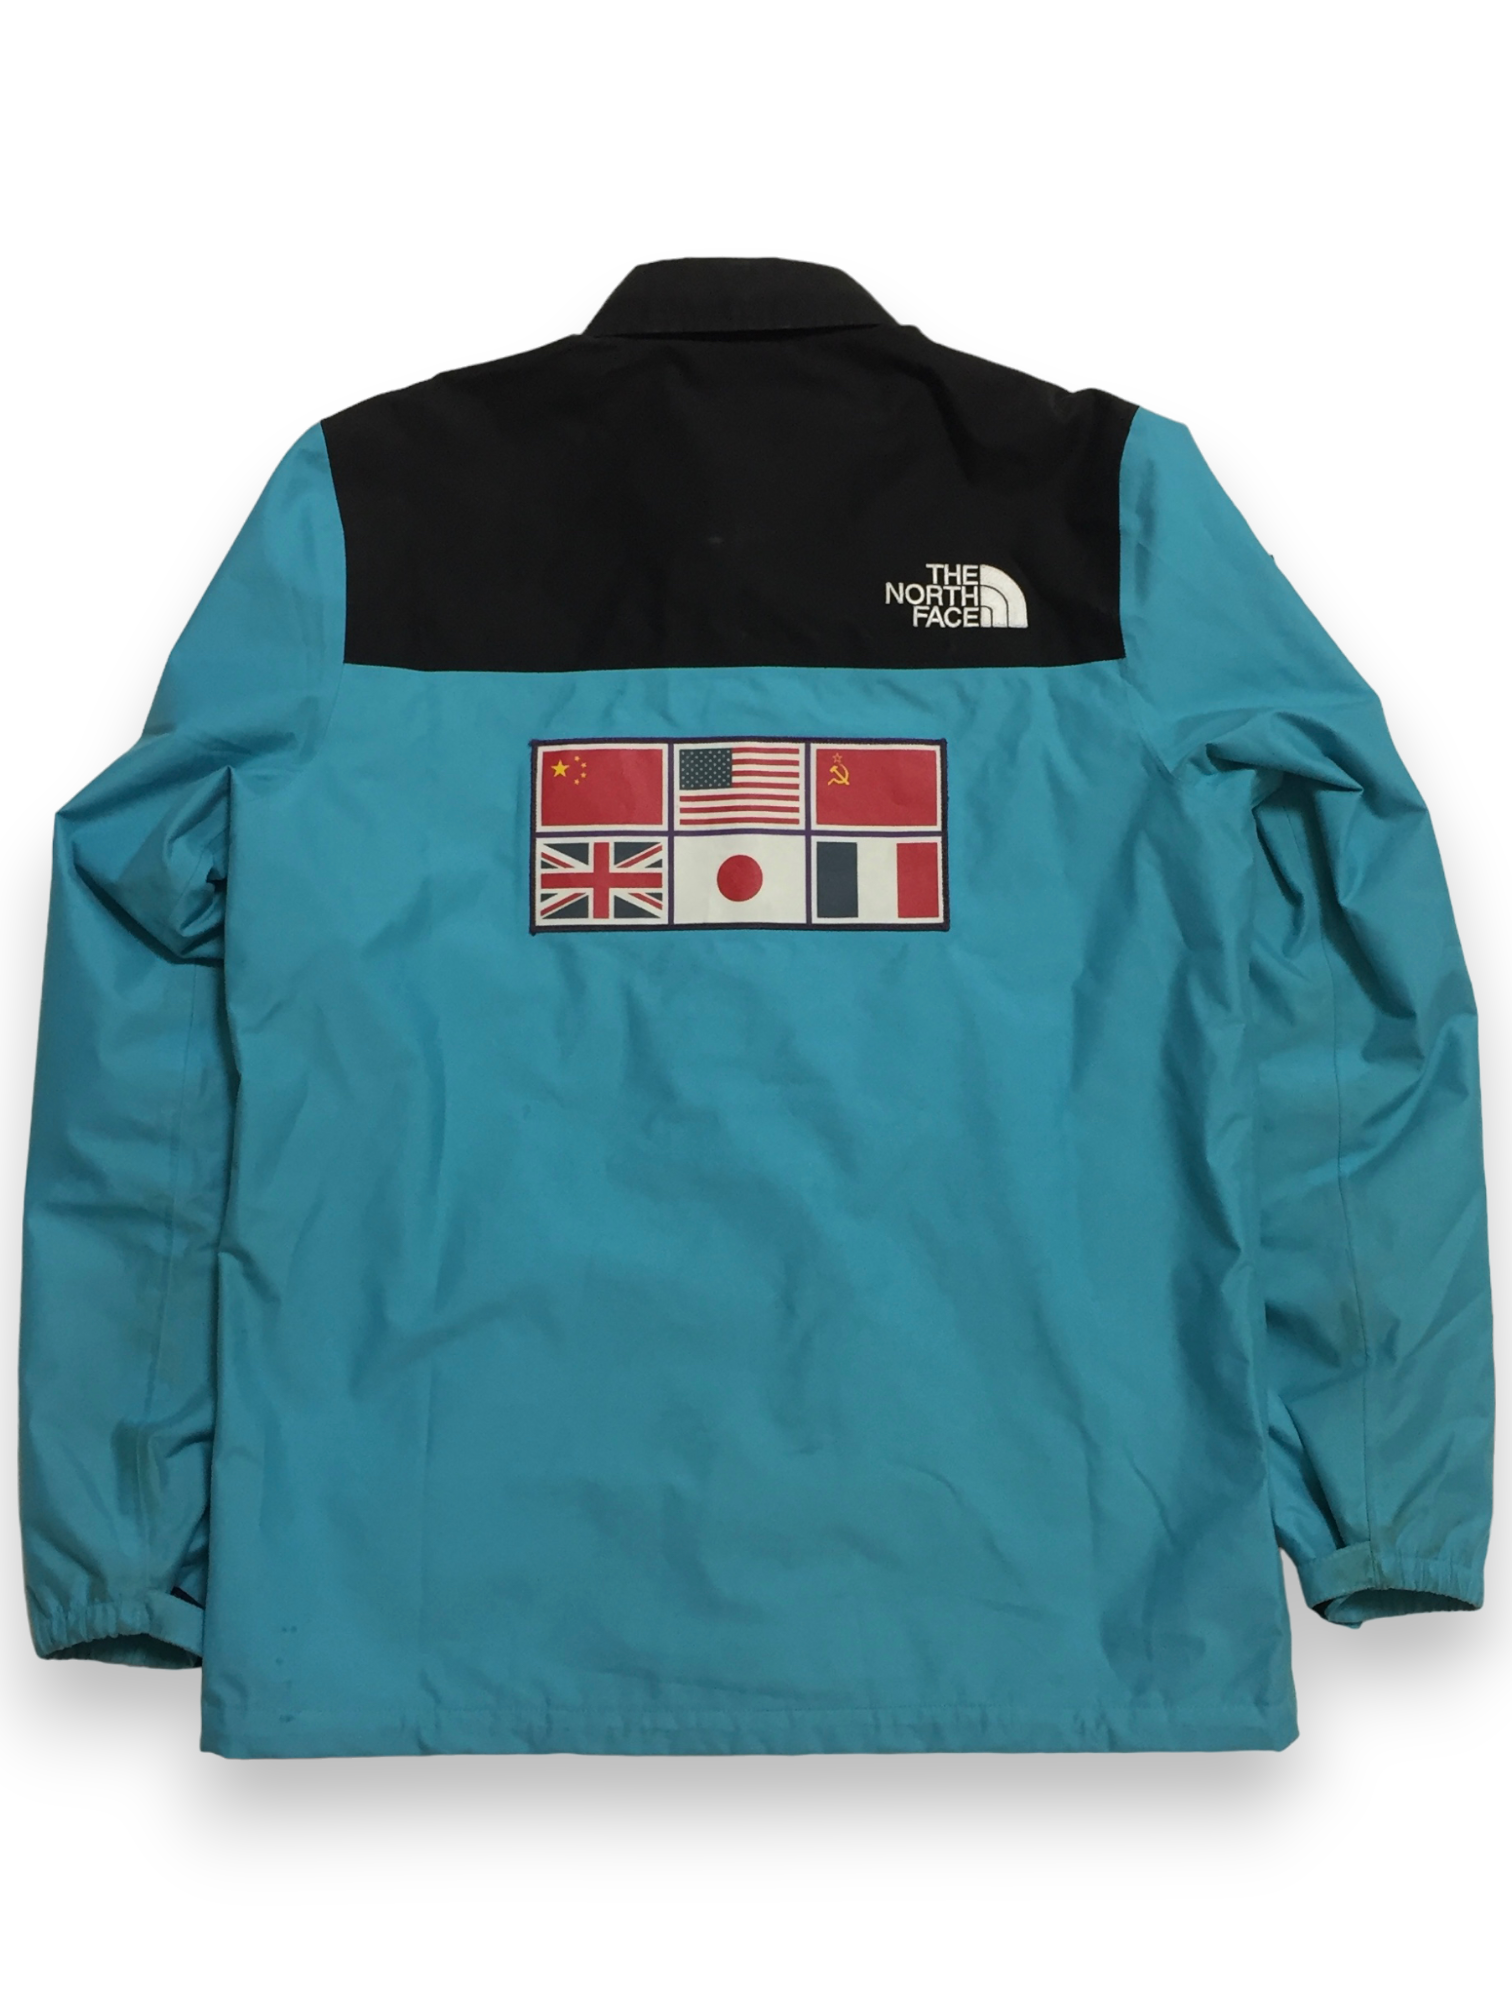 2014 Supreme x The North Face Teal Expedition Coach